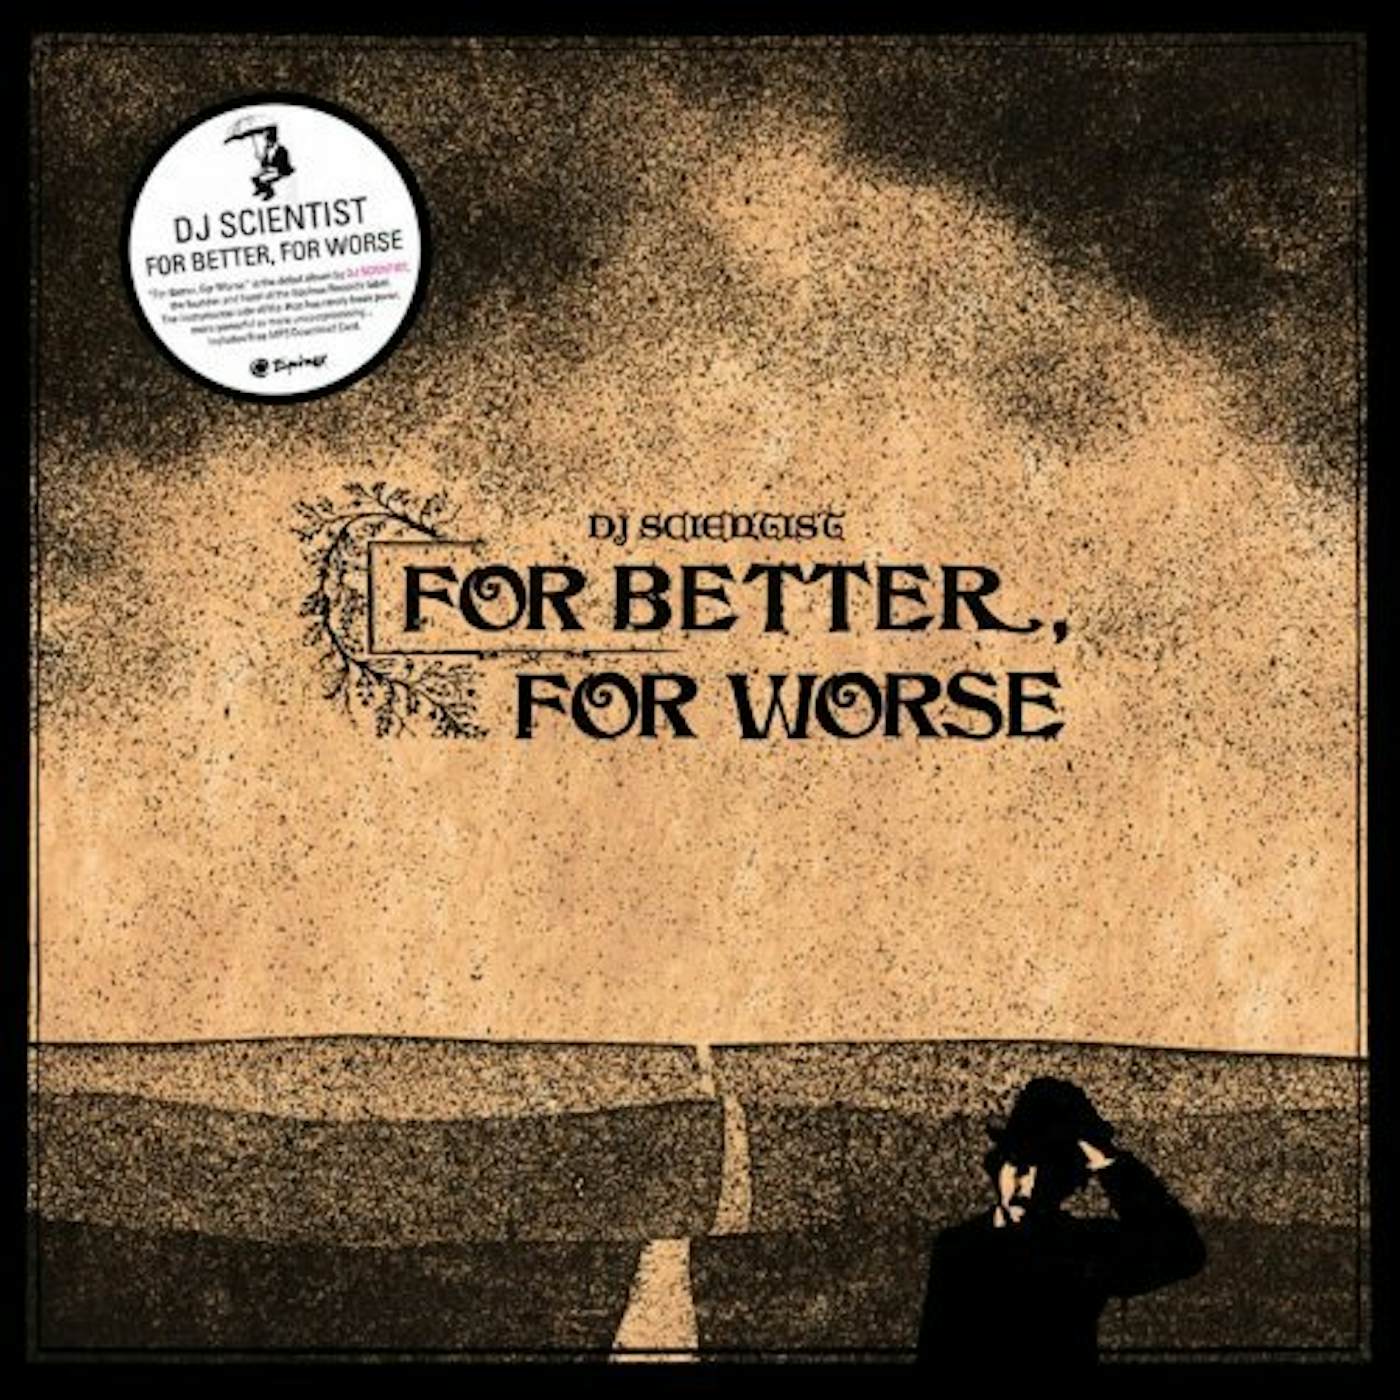 DJ Scientist FOR BETTER FOR WORSE Vinyl Record - UK Release